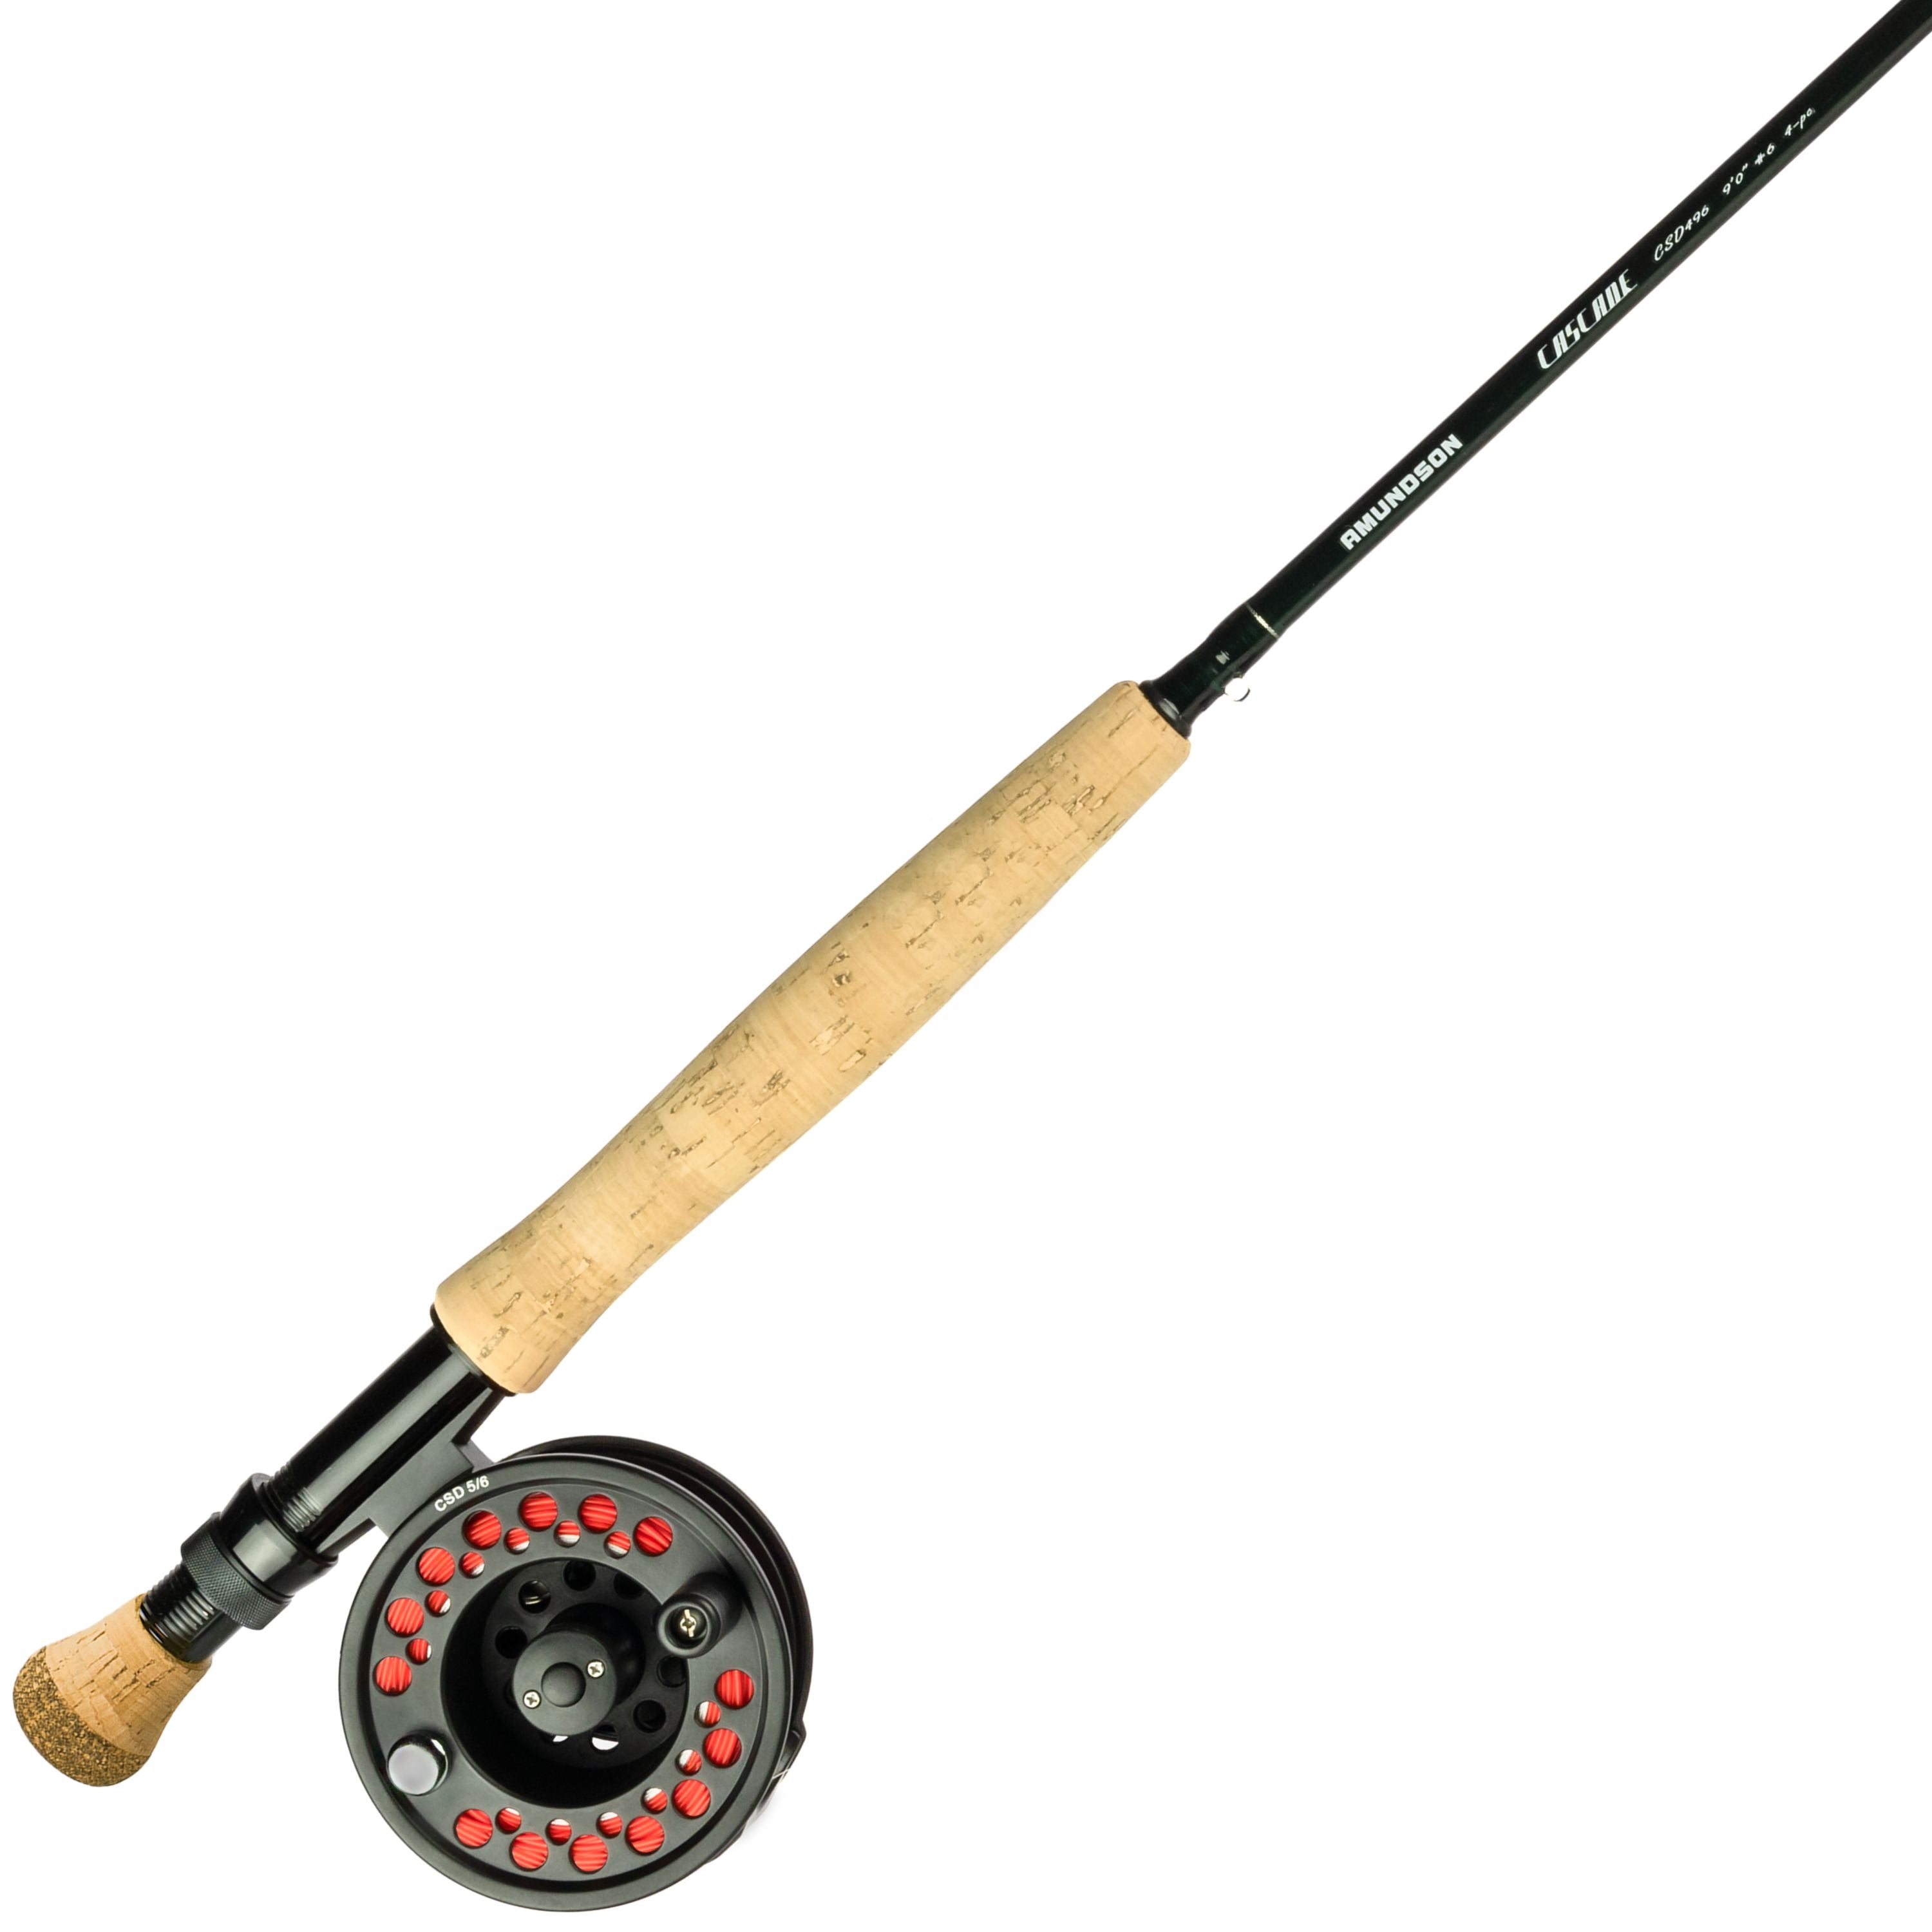 "Cascade" Fly fishing combo with fishing line